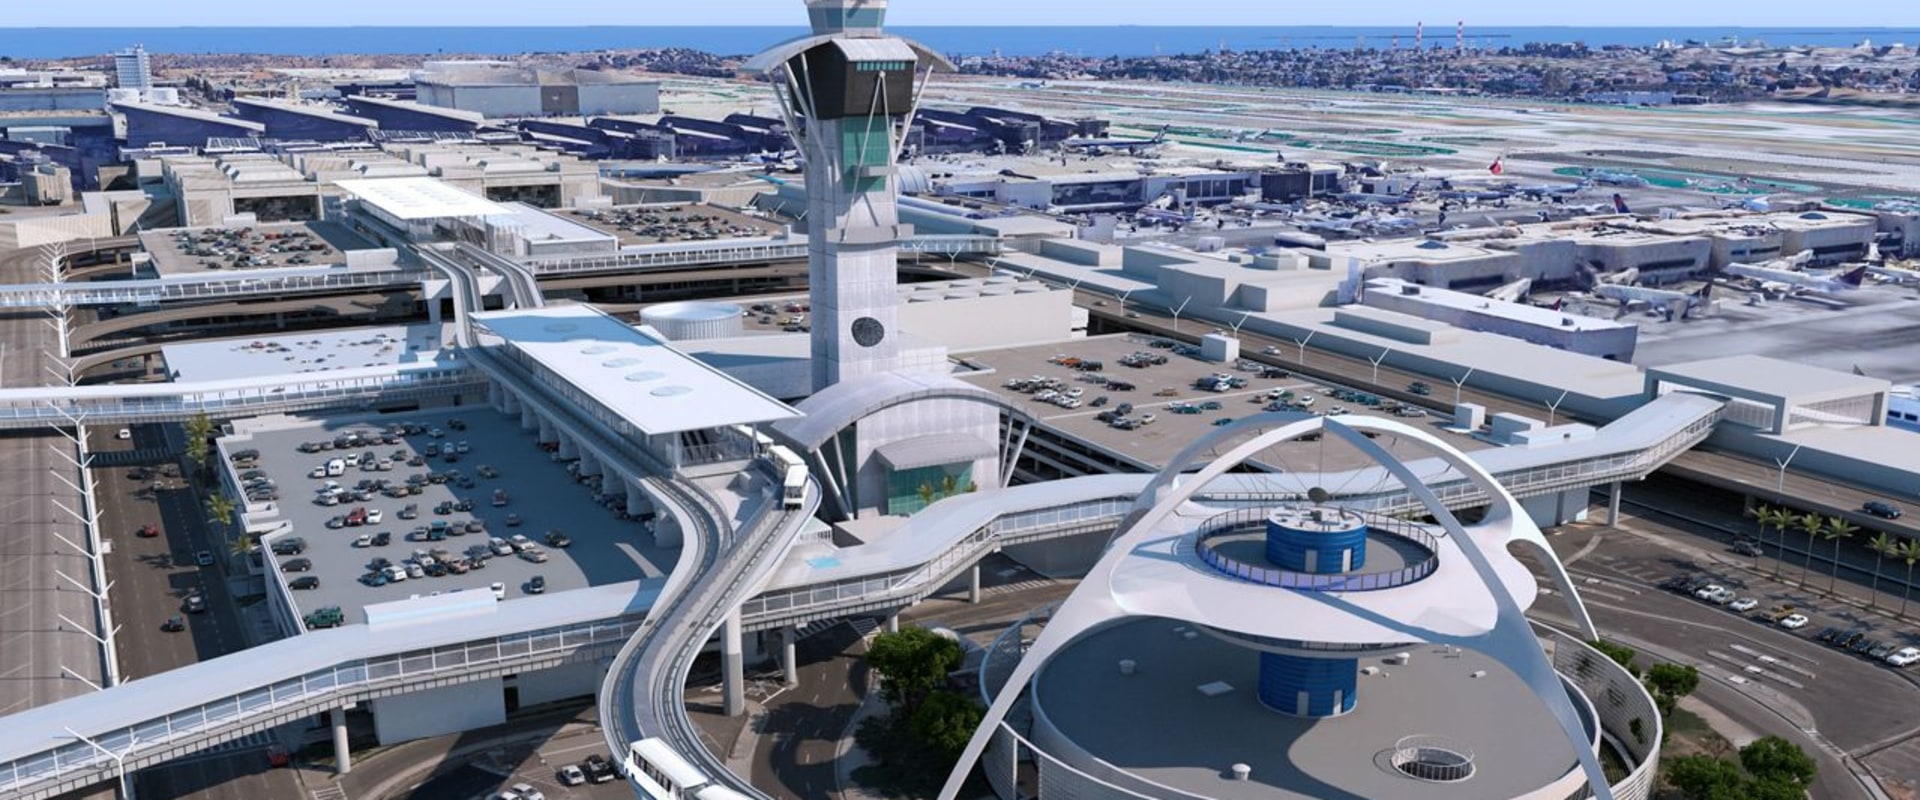 How Many Airports Are There in Los Angeles?